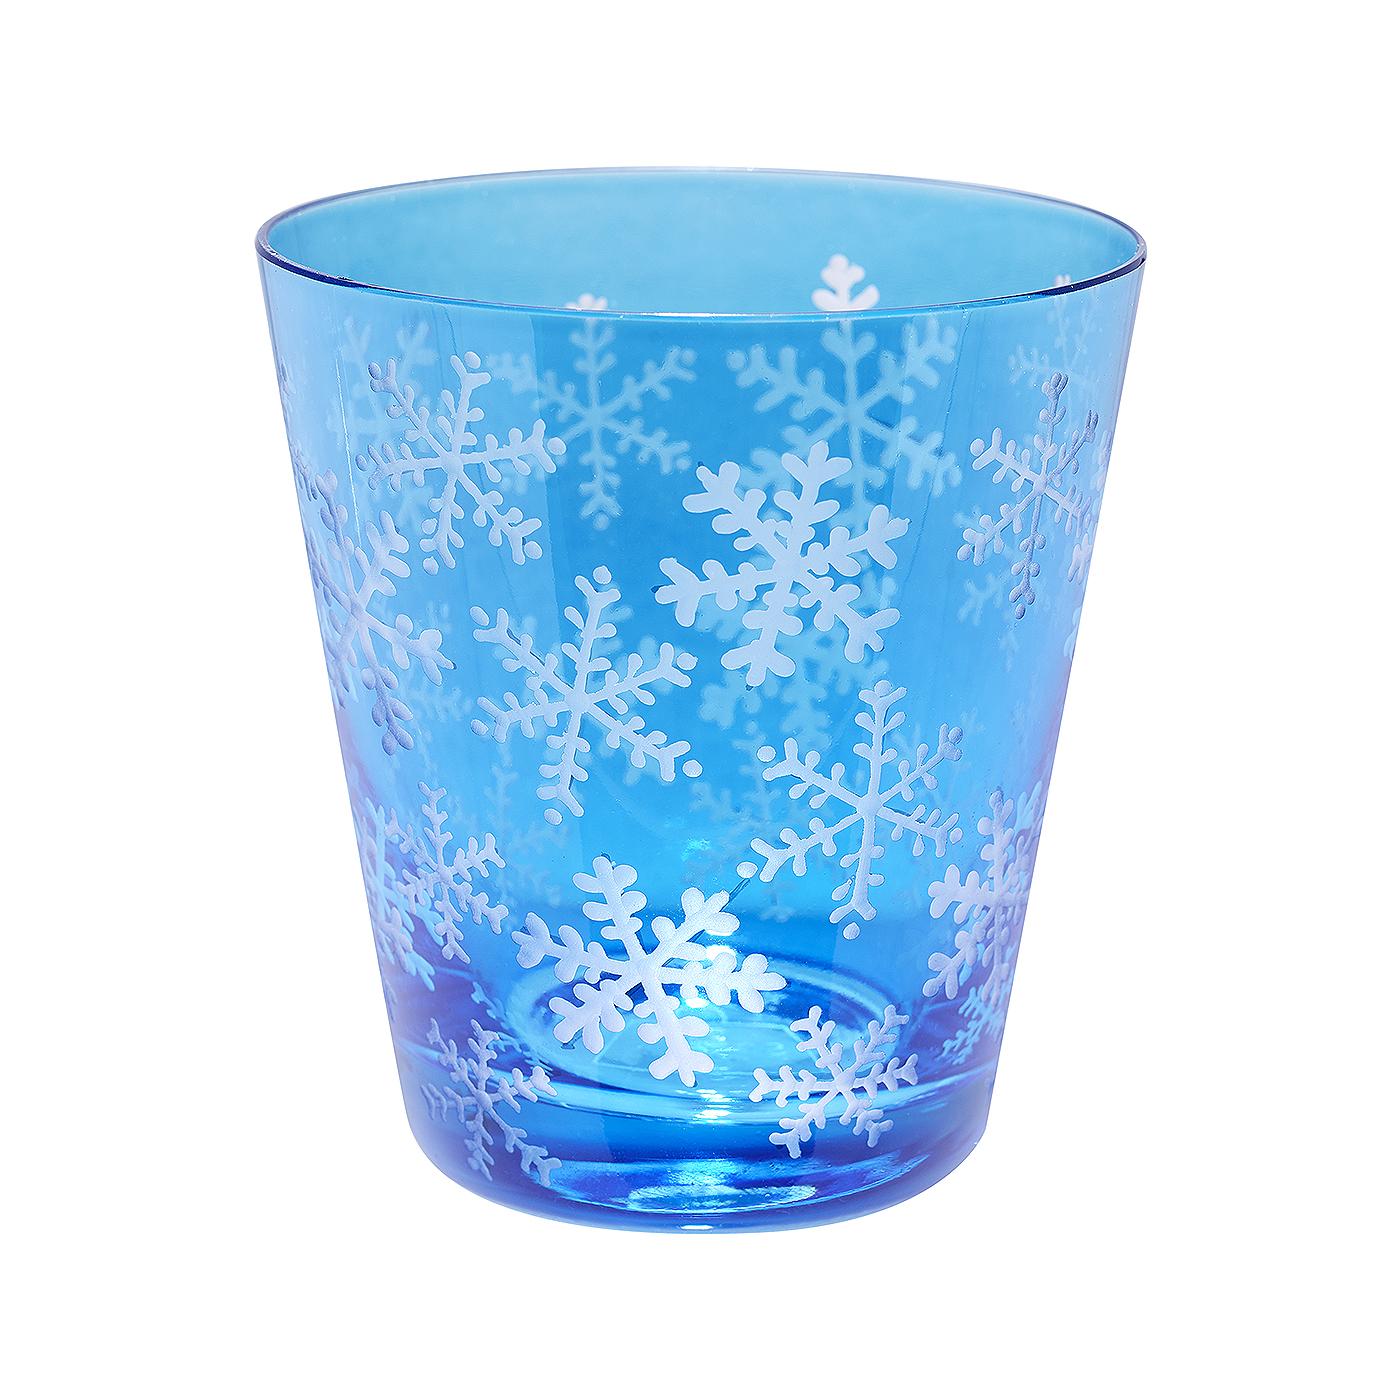 Set of six tumblers in hand blown blue crystal in country style.. The glasses are hand-engraved with a winter decor snowflakes all around. The glasses are signed by Sofina in the bottom. Completely handmade in Bavaria by glass artists. A matching